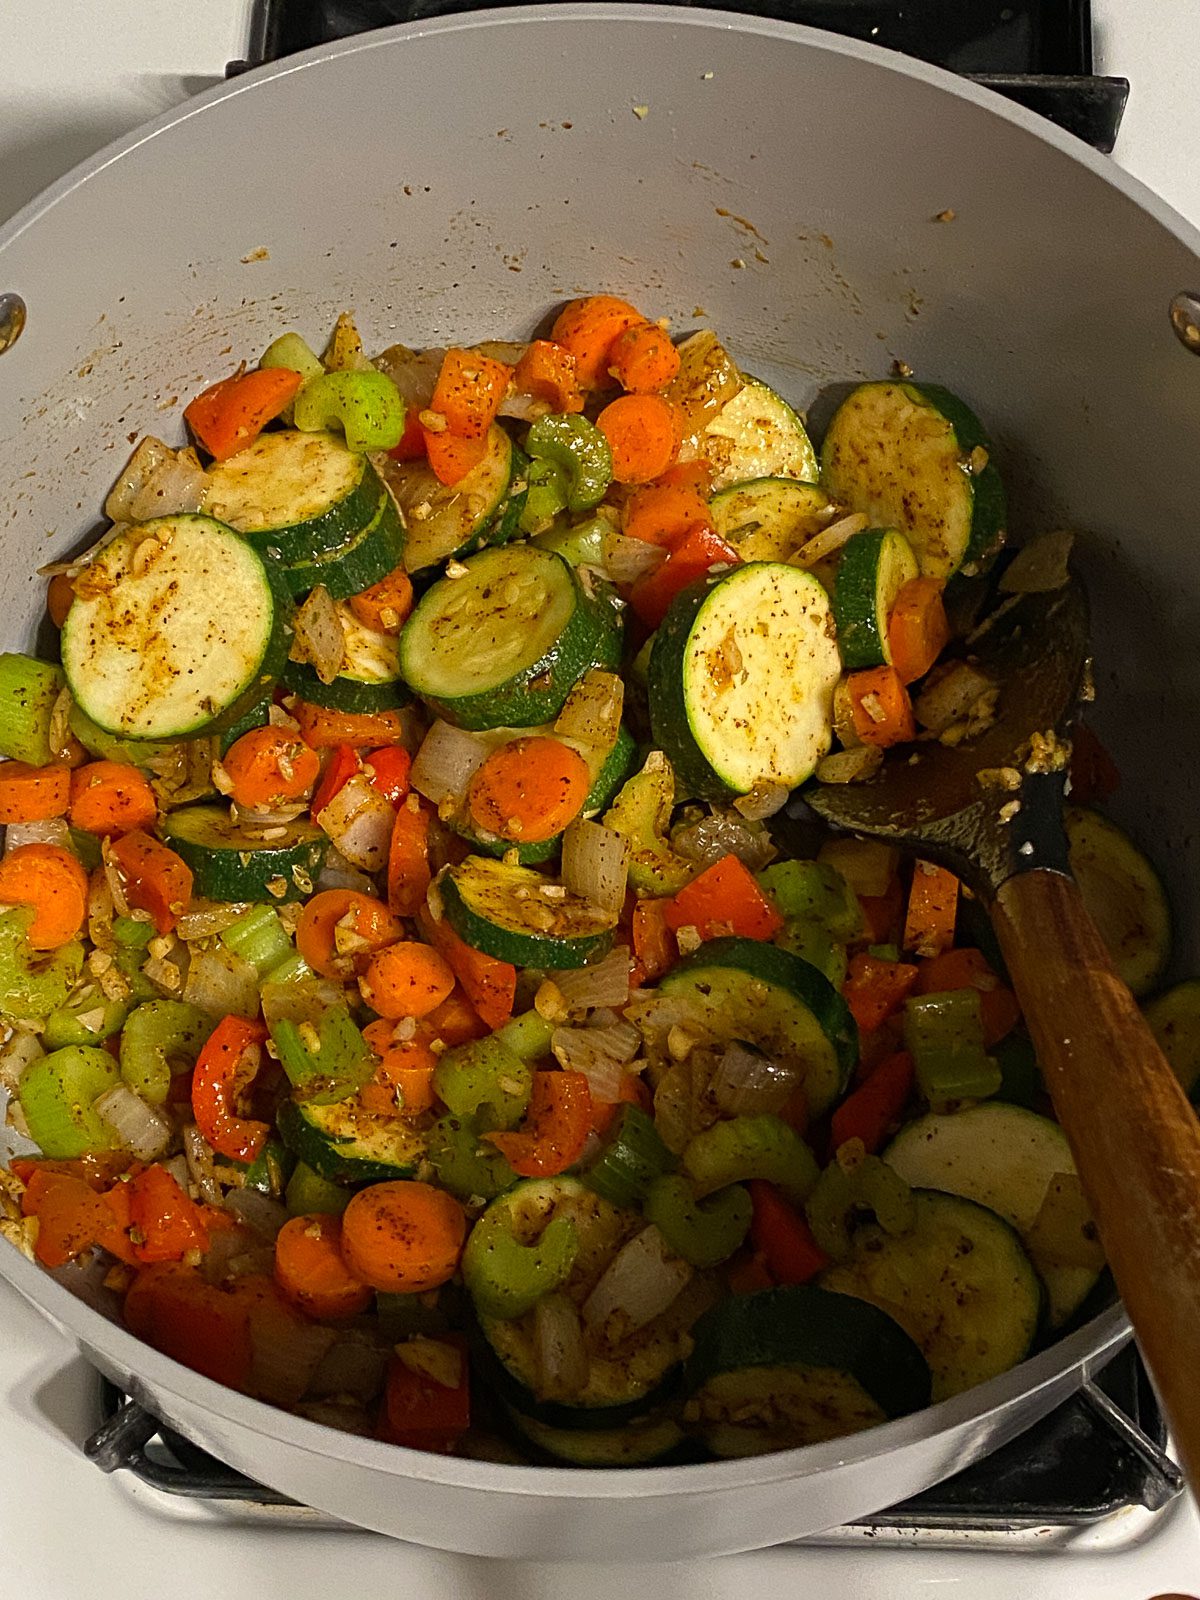 process of mixing veggies and spices in pan